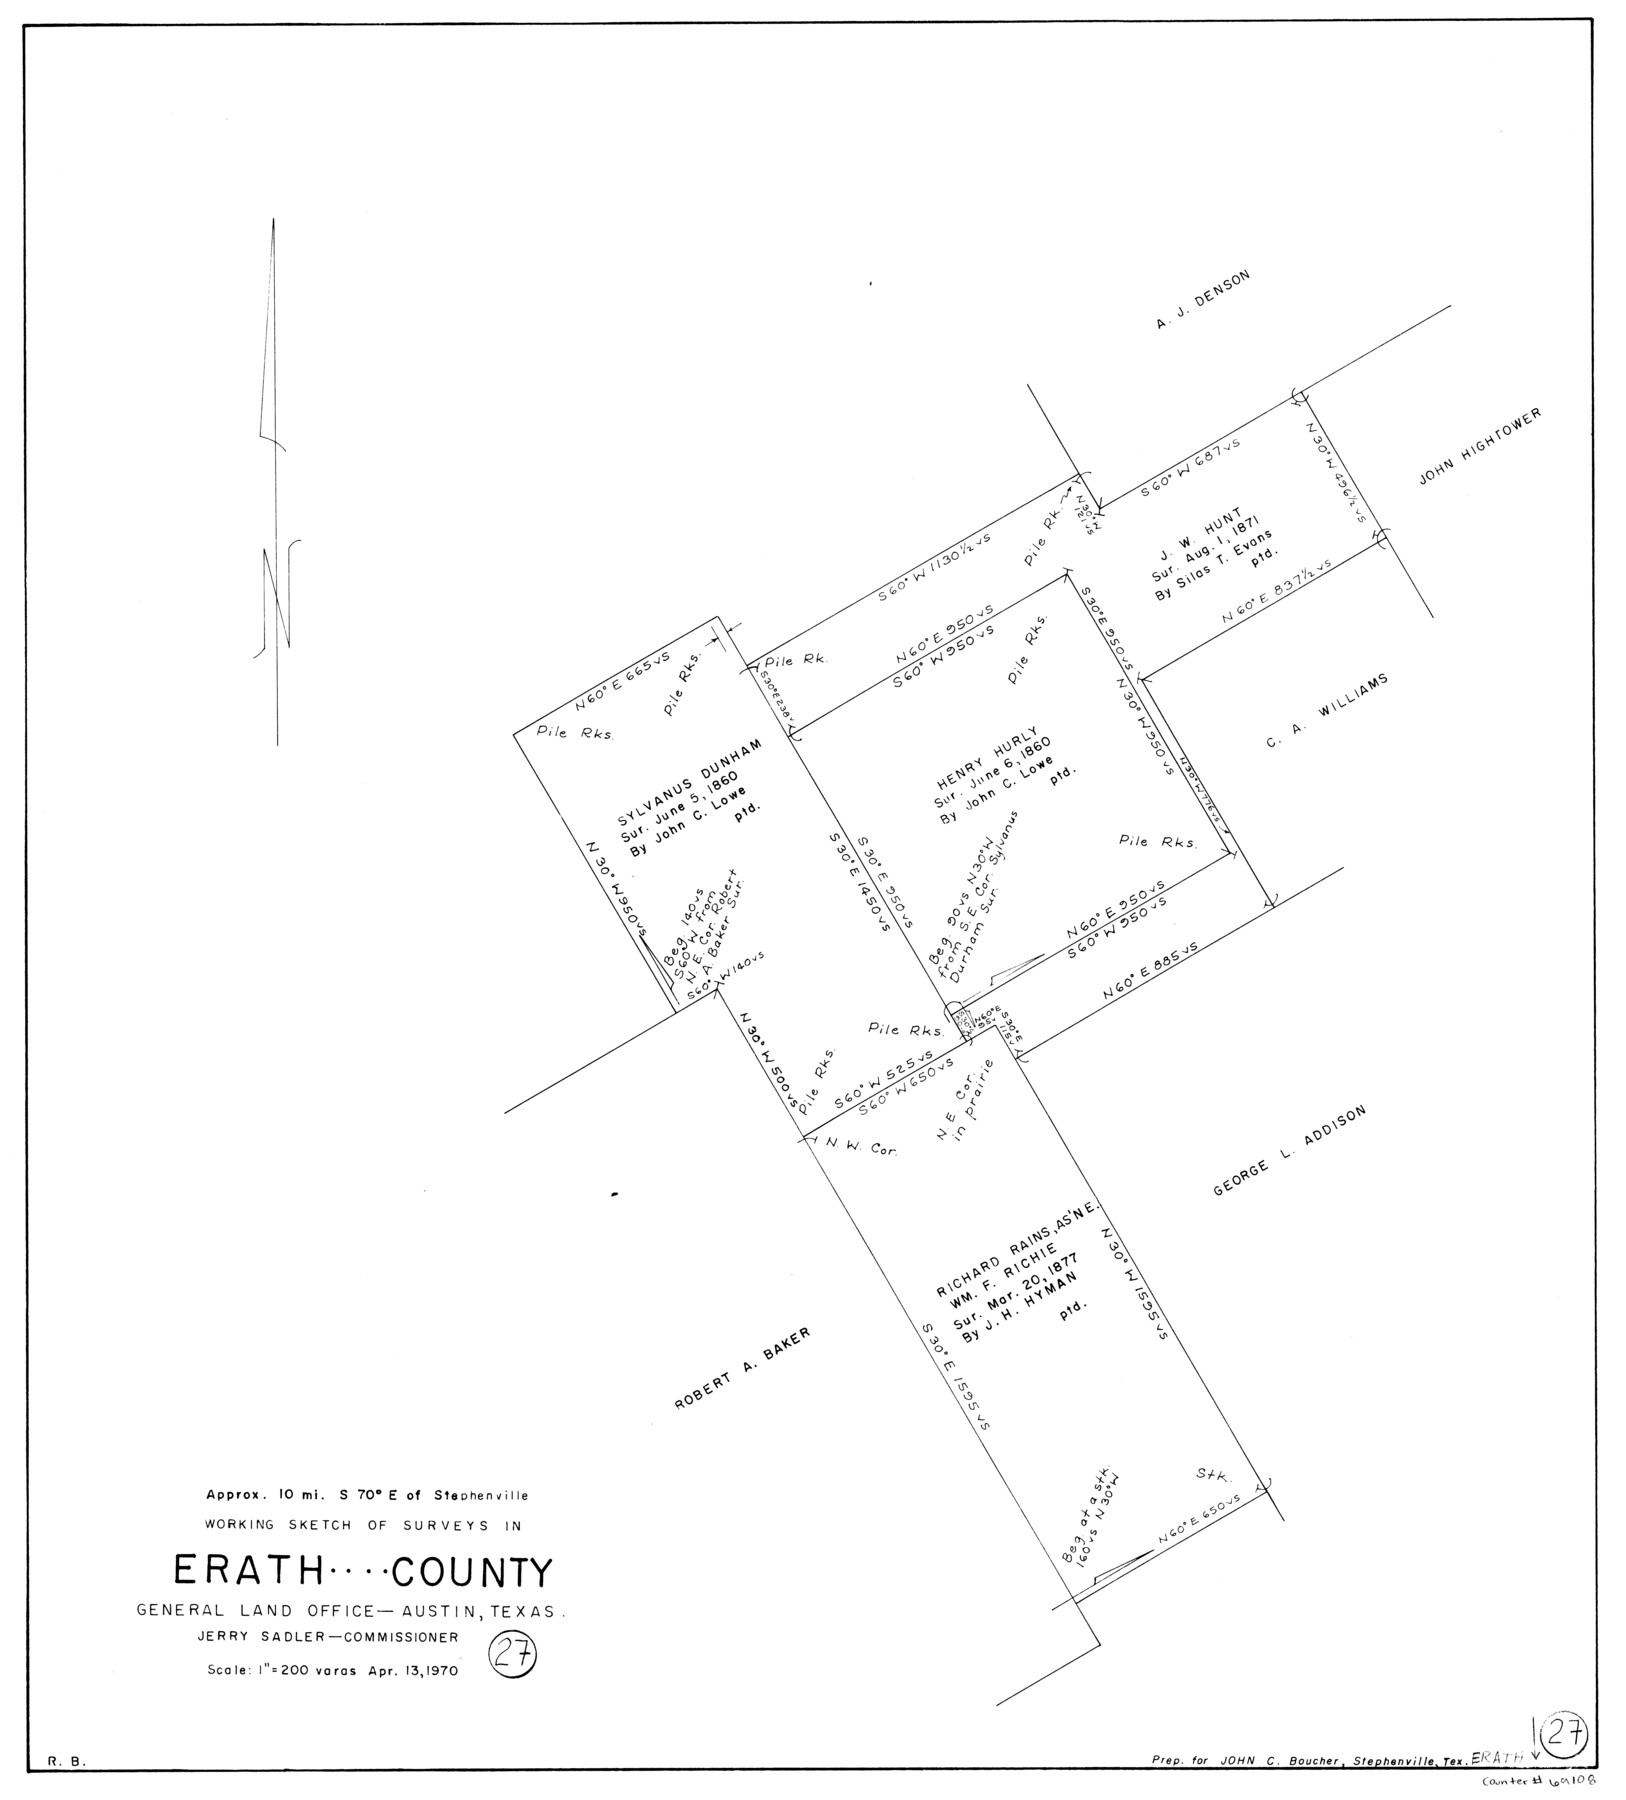 69108, Erath County Working Sketch 27, General Map Collection